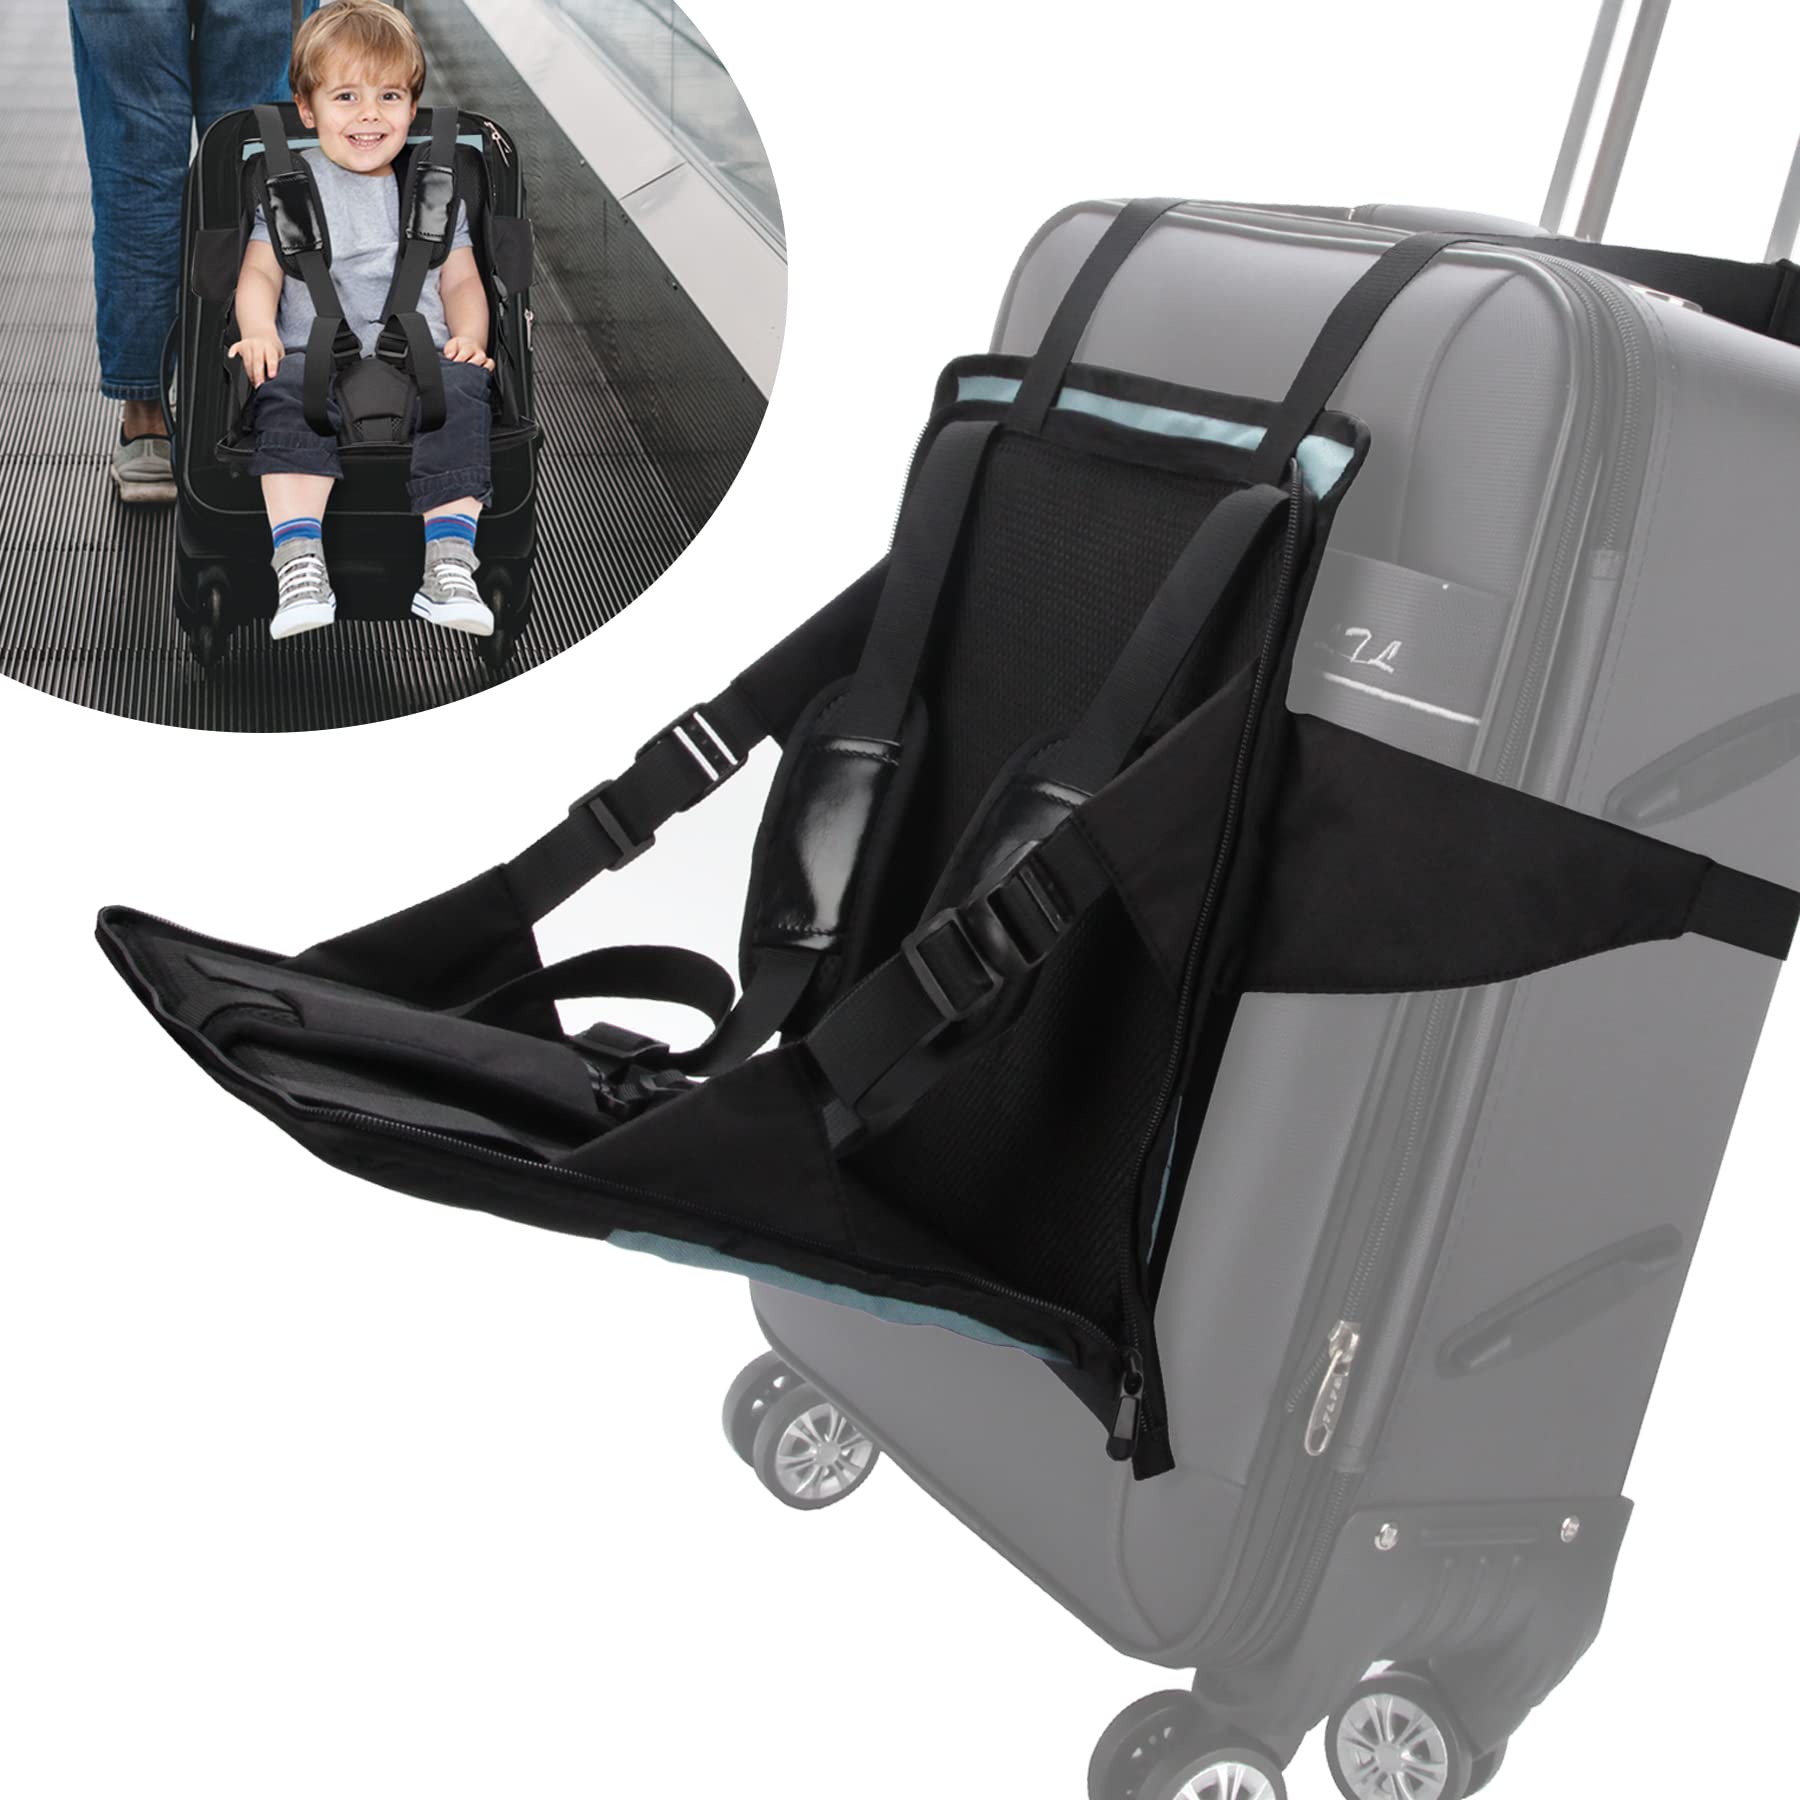 Travel Seat,Ride-on Suitcase for Kids,Foldable Travel Child Seat,Child Carrier for Carry-on Luggage-Family Airport Travel Made Easy